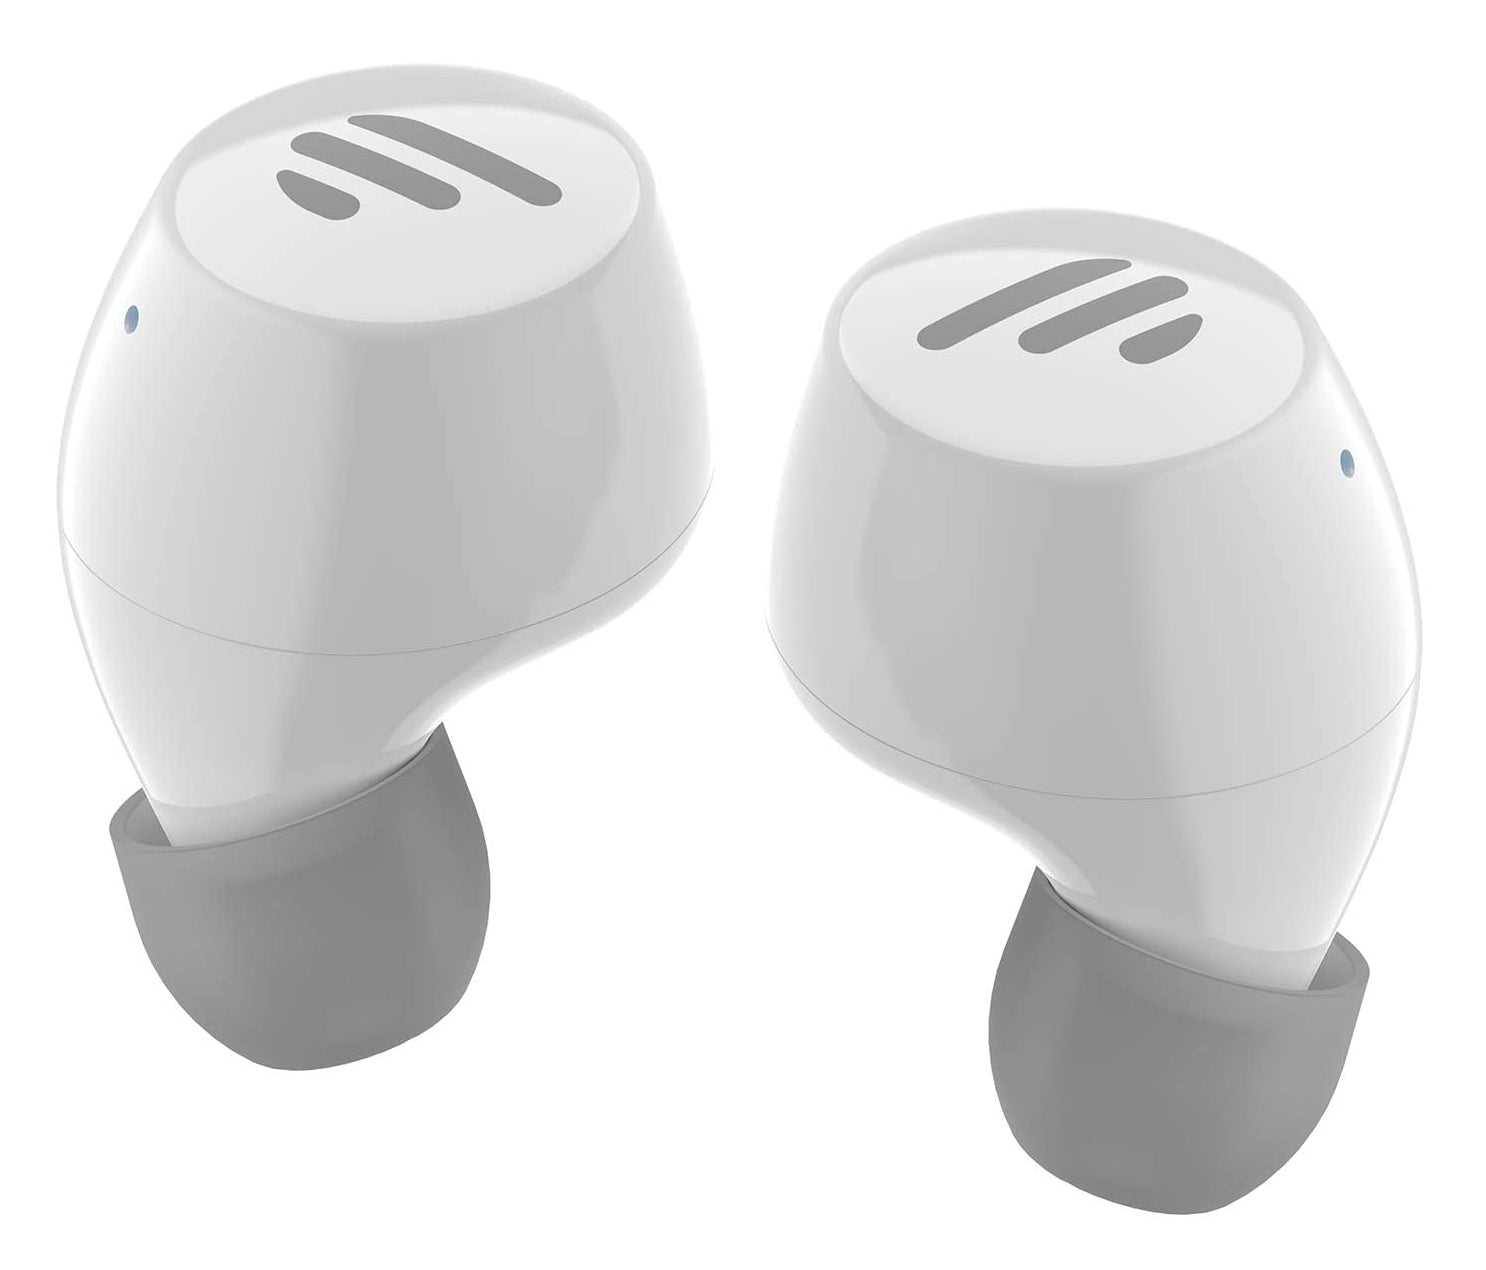 Edifier TWS1 True Wireless (TWS) Bluetooth 5.0 Earbuds With Touch Control - White